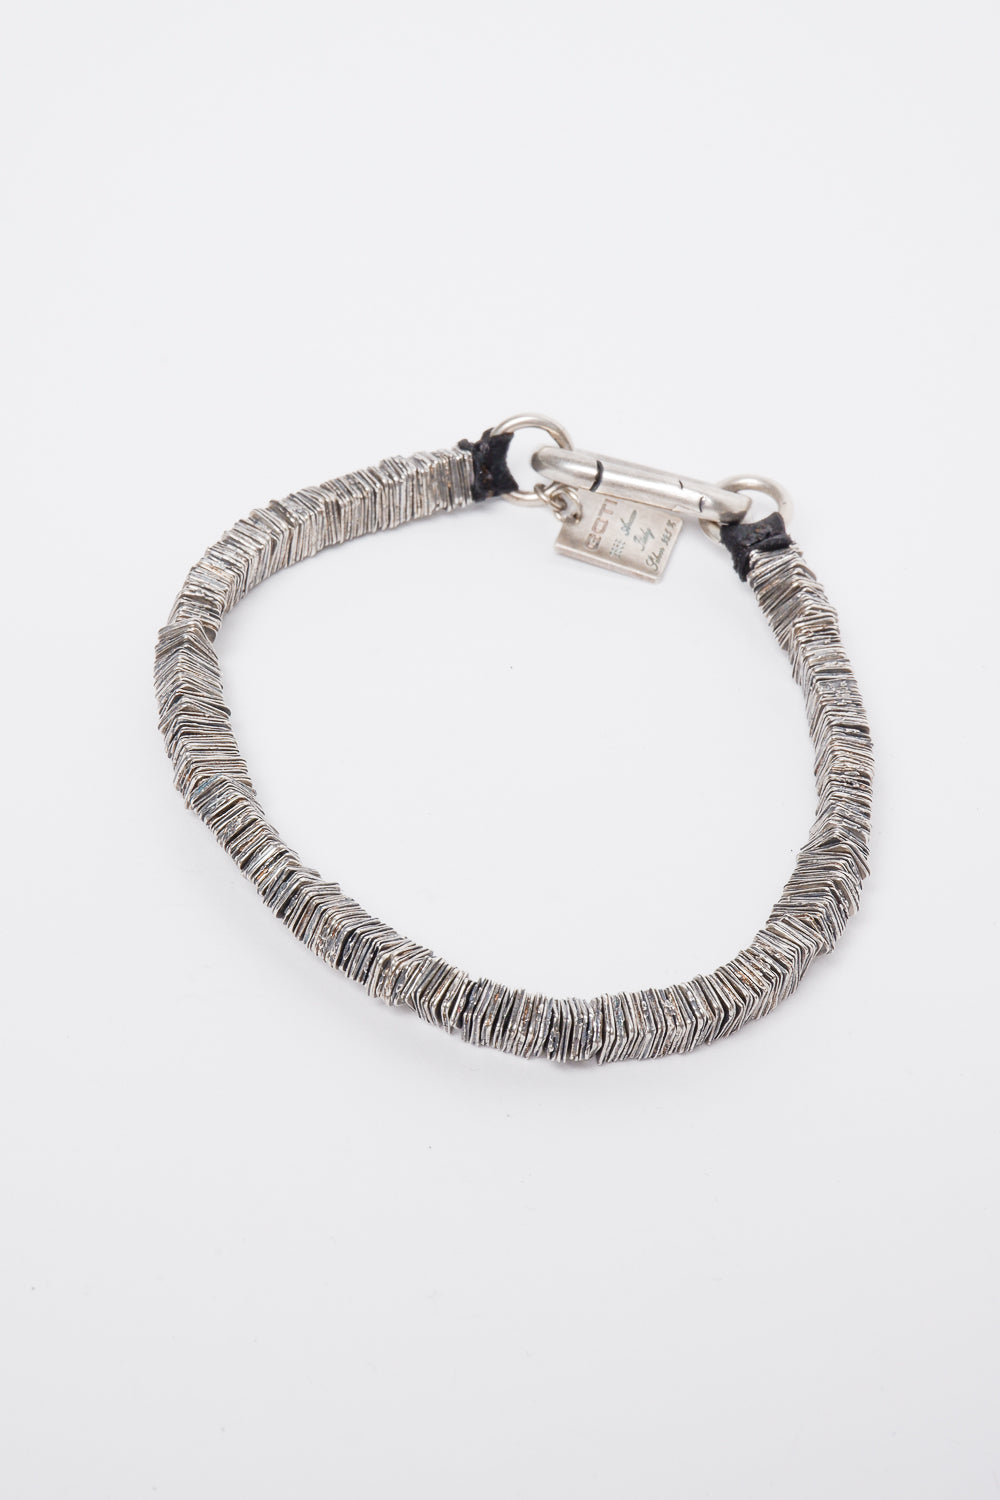 Buy the GOTI BR1114 Bracelet at Intro. Spend £50 for free UK delivery. Official stockists. We ship worldwide.